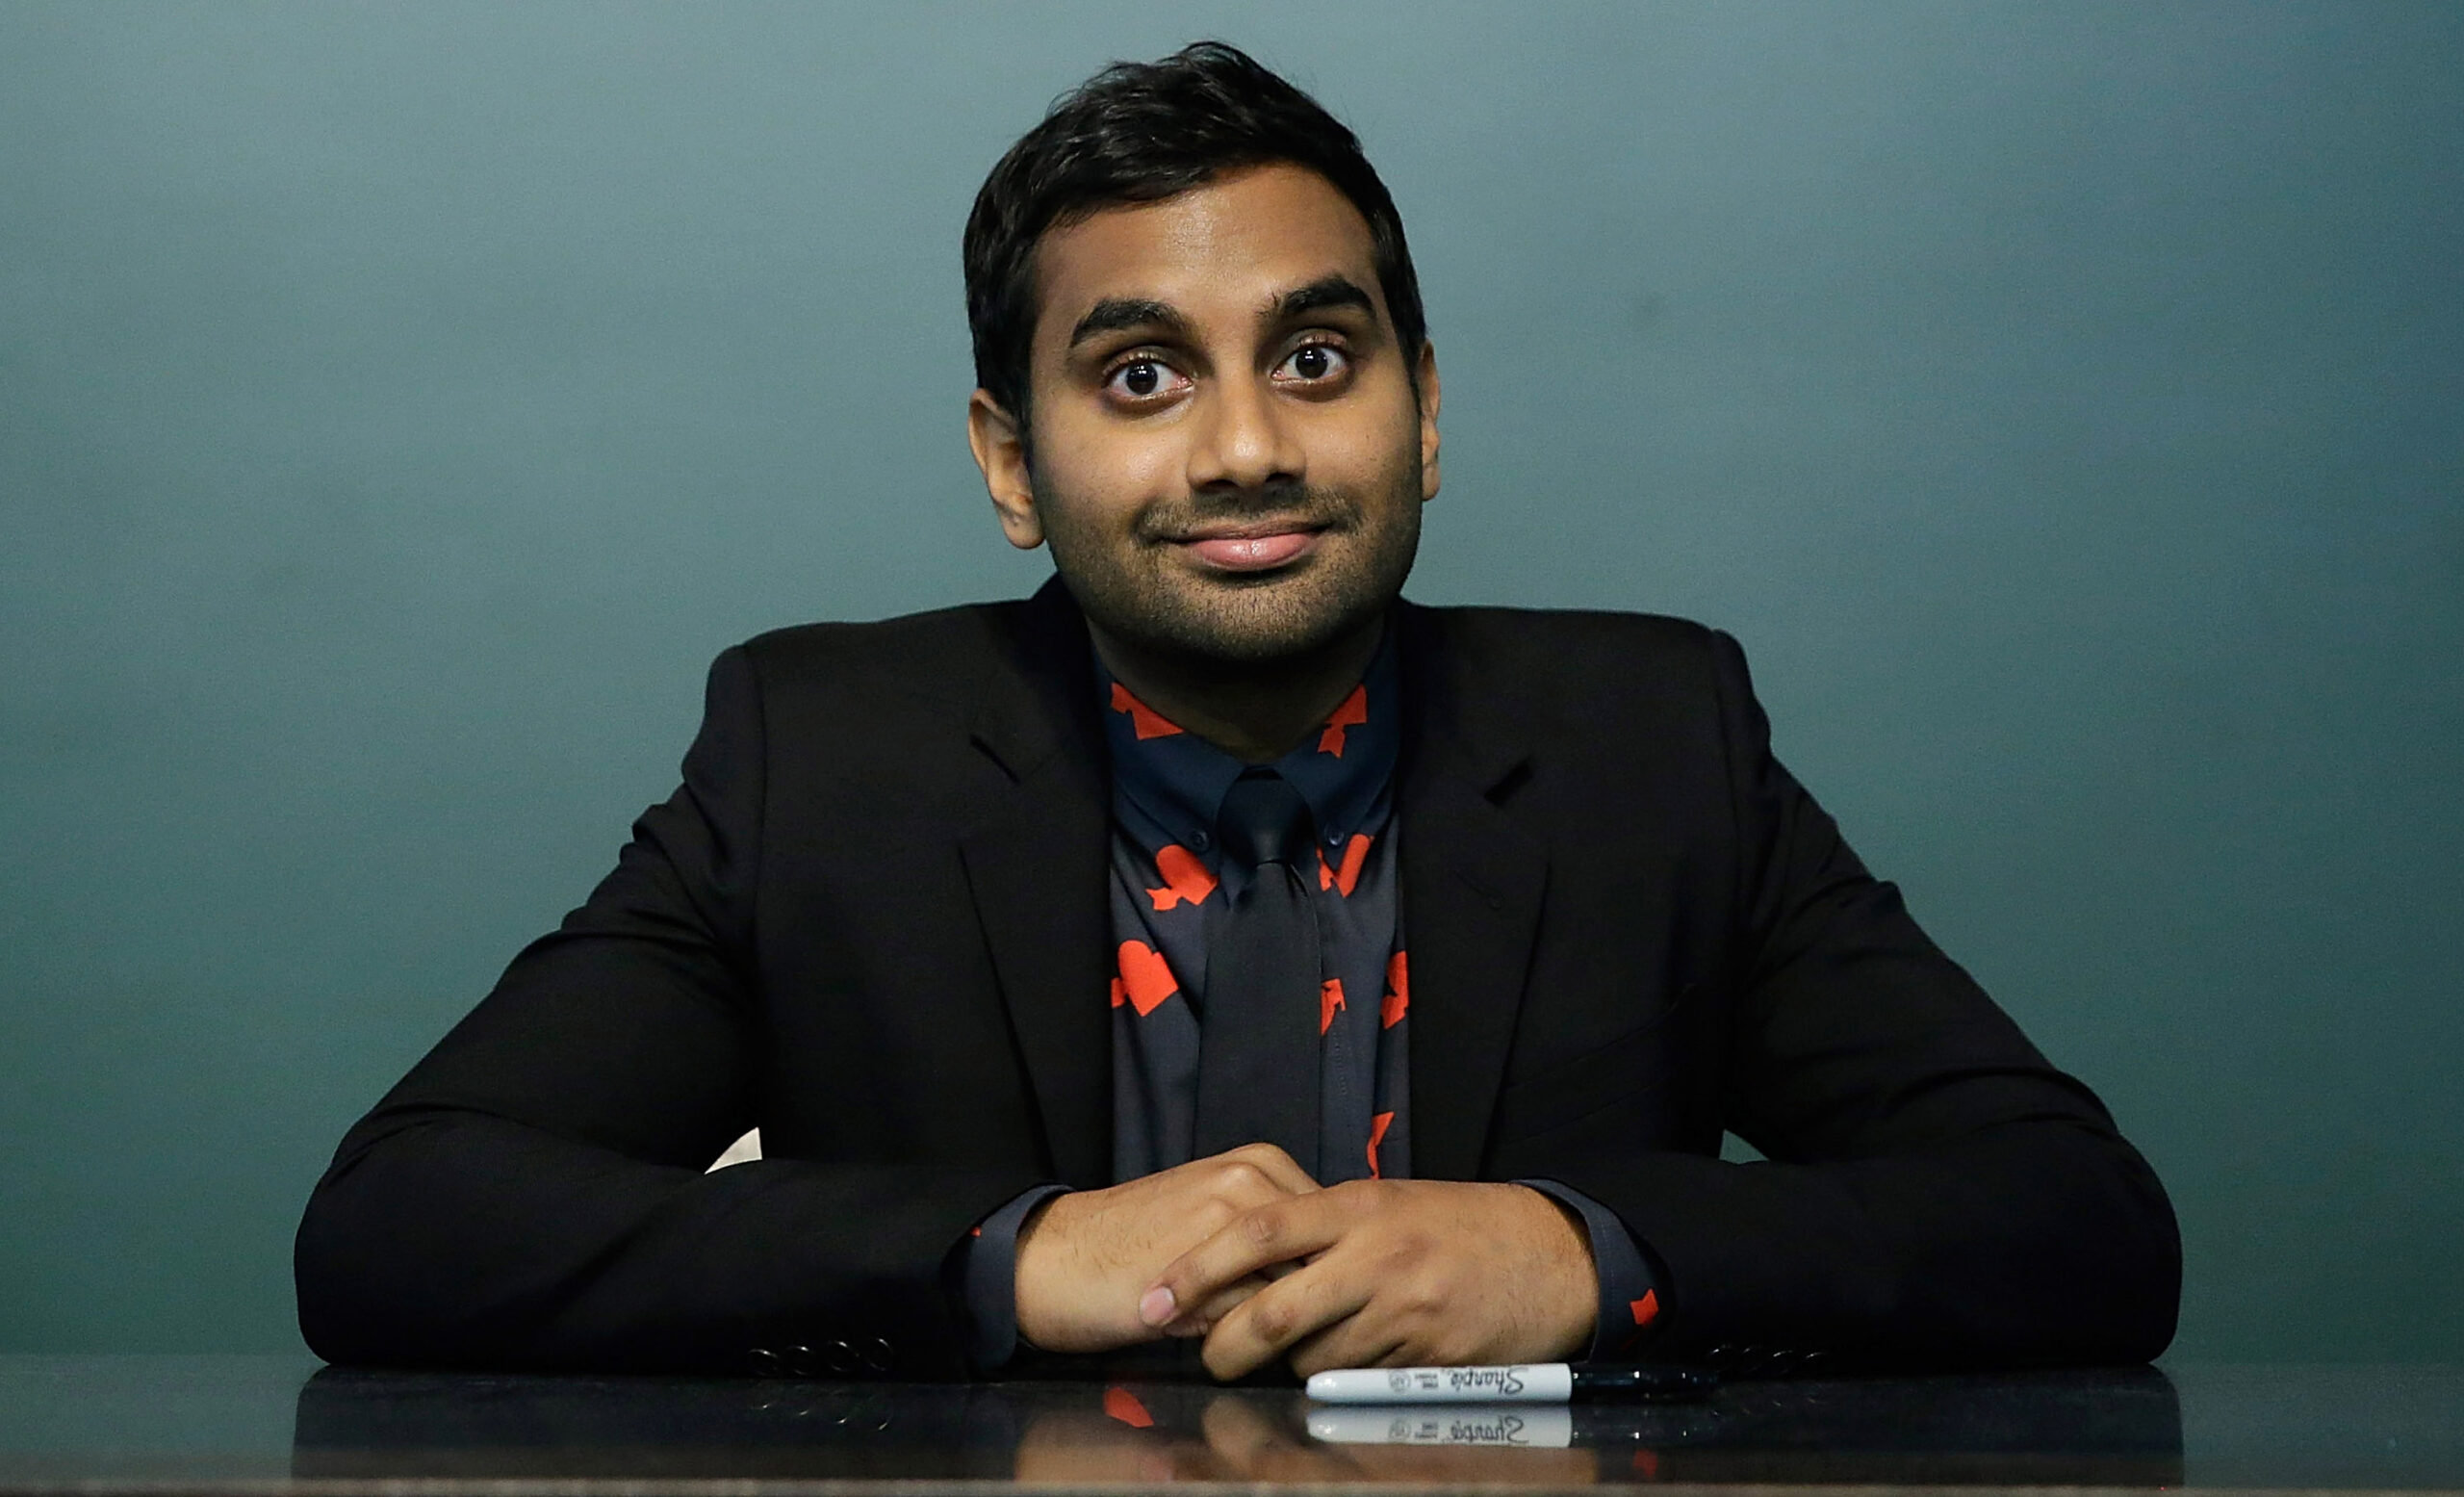 Aziz Ansari What it’s really like to meet him in person for the